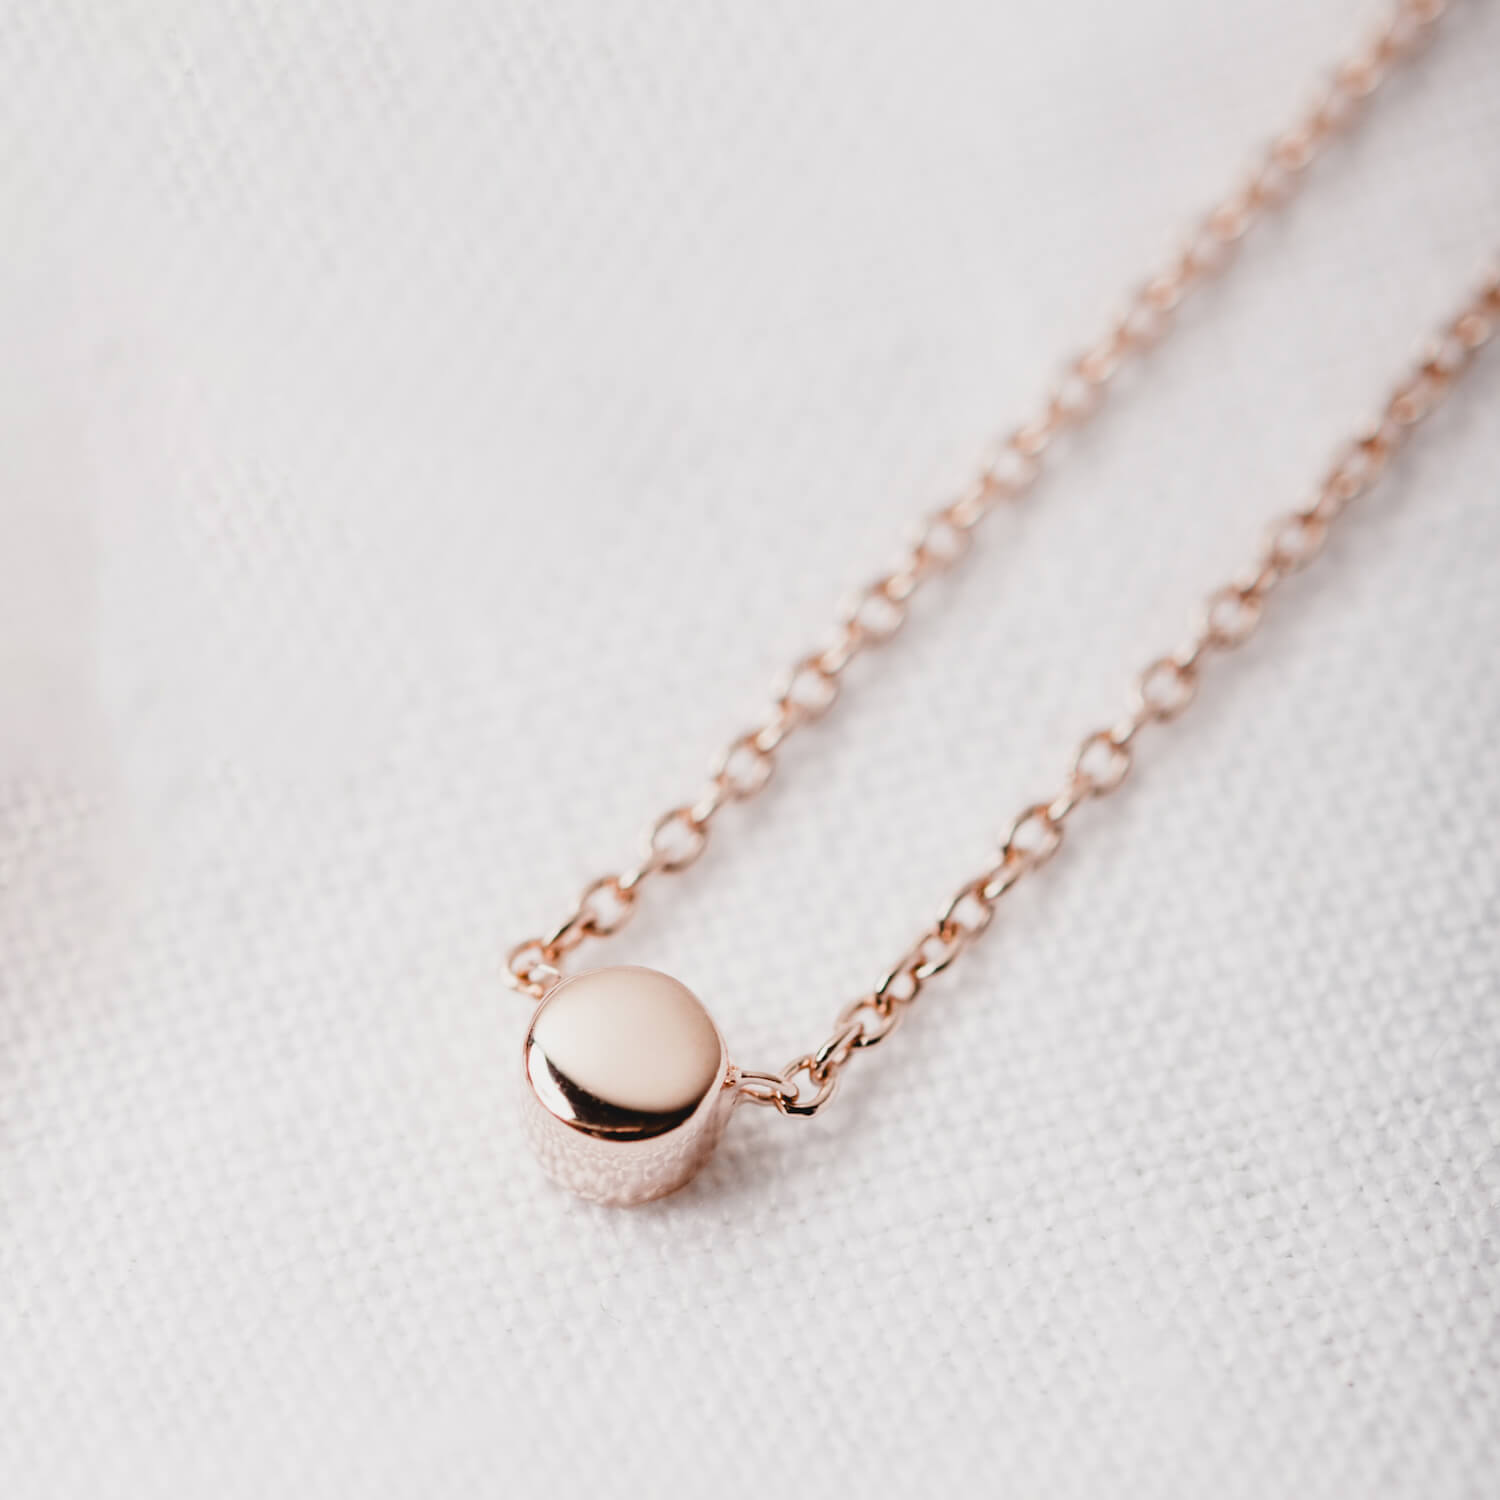 Gold Dot Necklace, Tiny Disc Necklace, Delicate Flat Circle Necklace , Thin  Gold Chain, Every Day Necklace, Minimal Small Gift for Her AD008 - Etsy